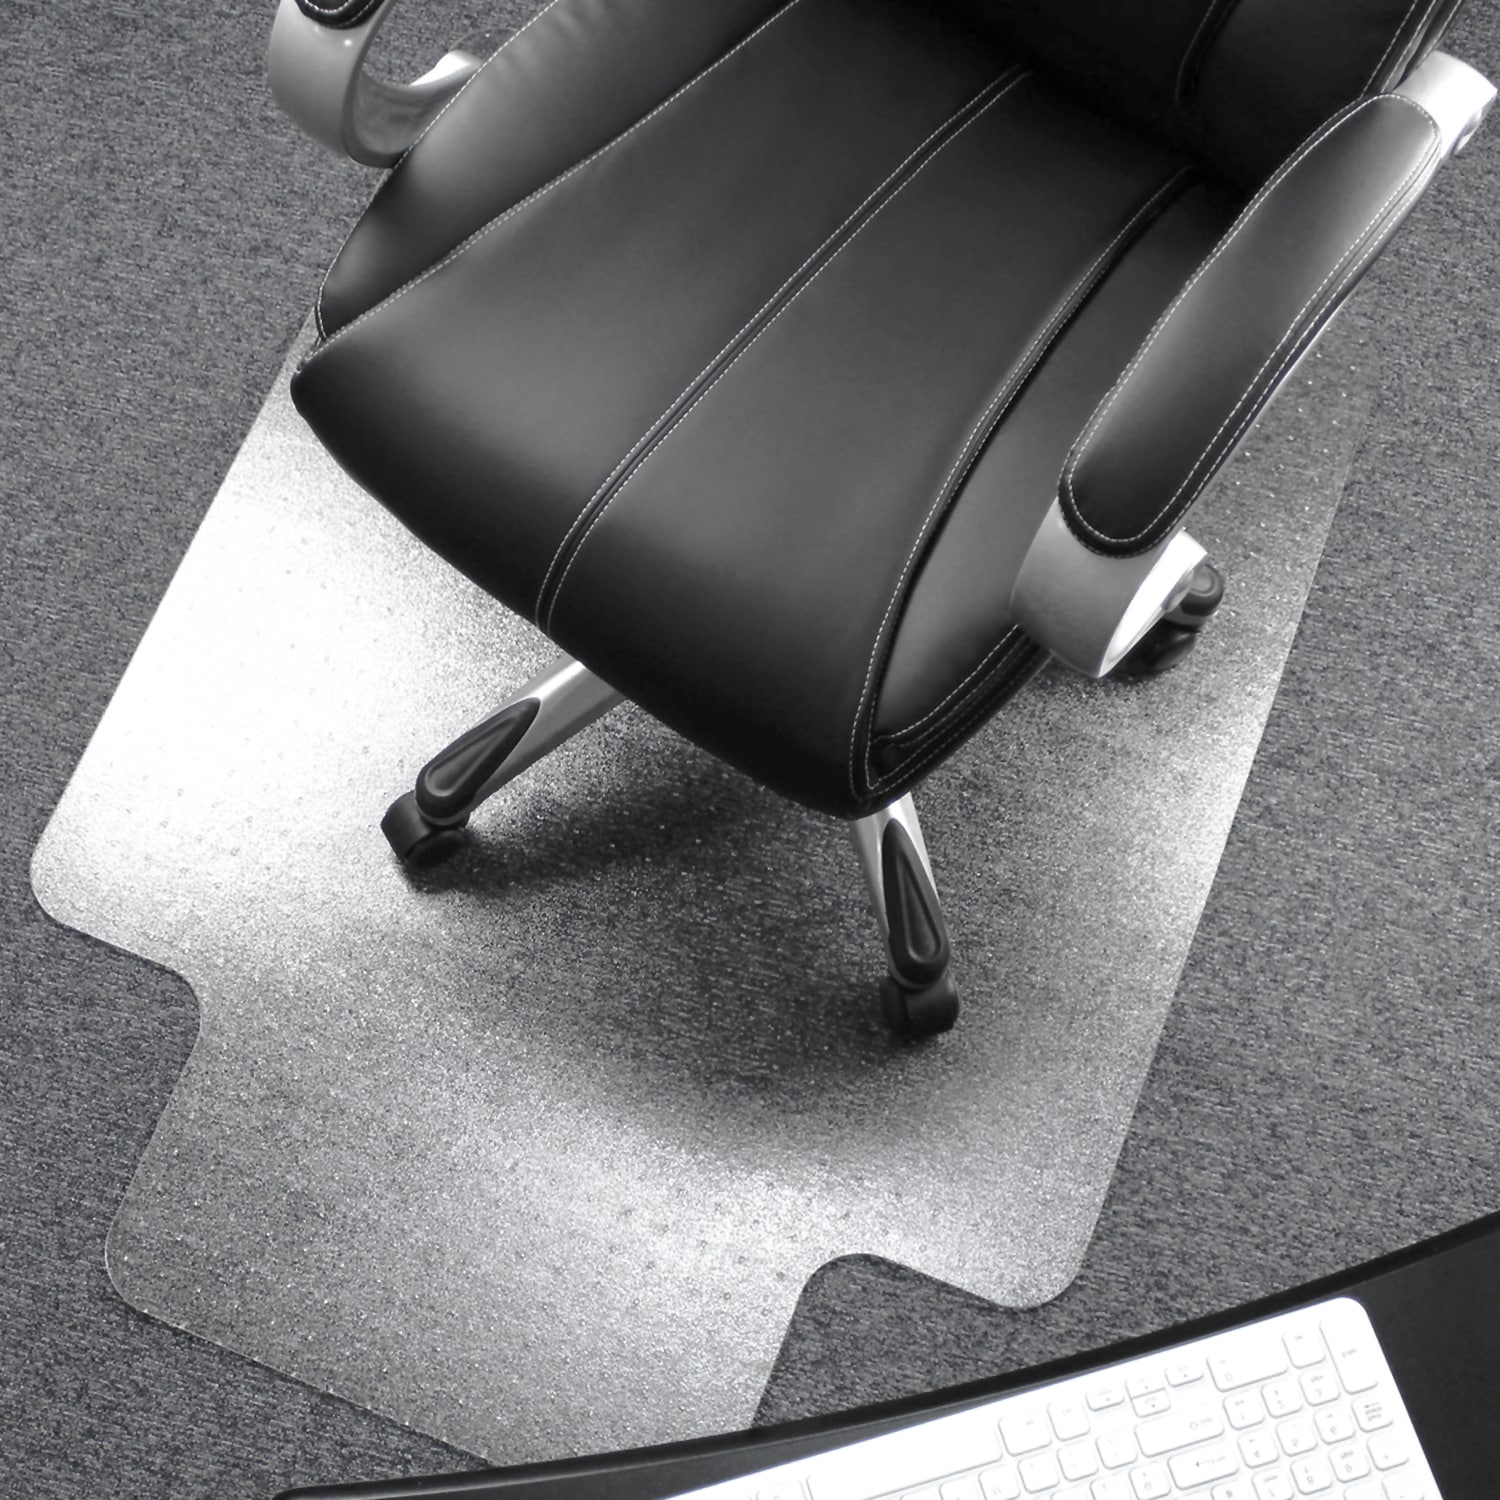 Ultimat 4-ft x 4-ft Clear Indoor Chair Mat in the Mats department